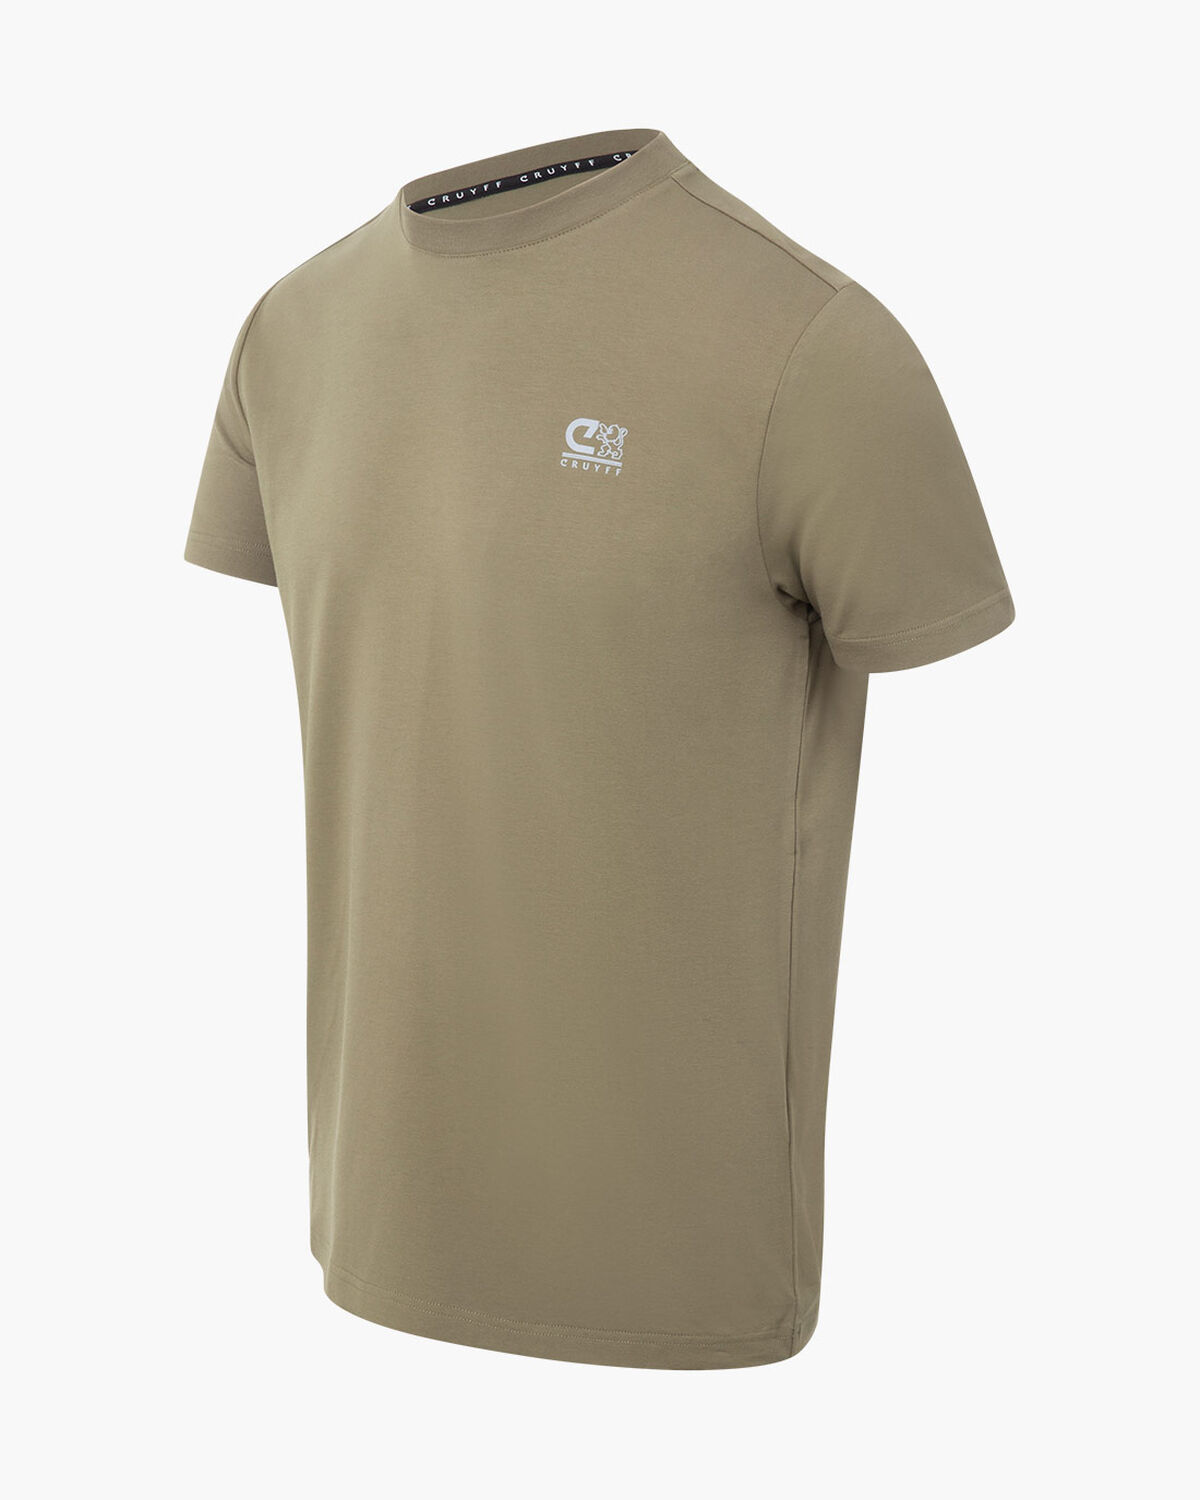 Soothe Tee, Army green, hi-res